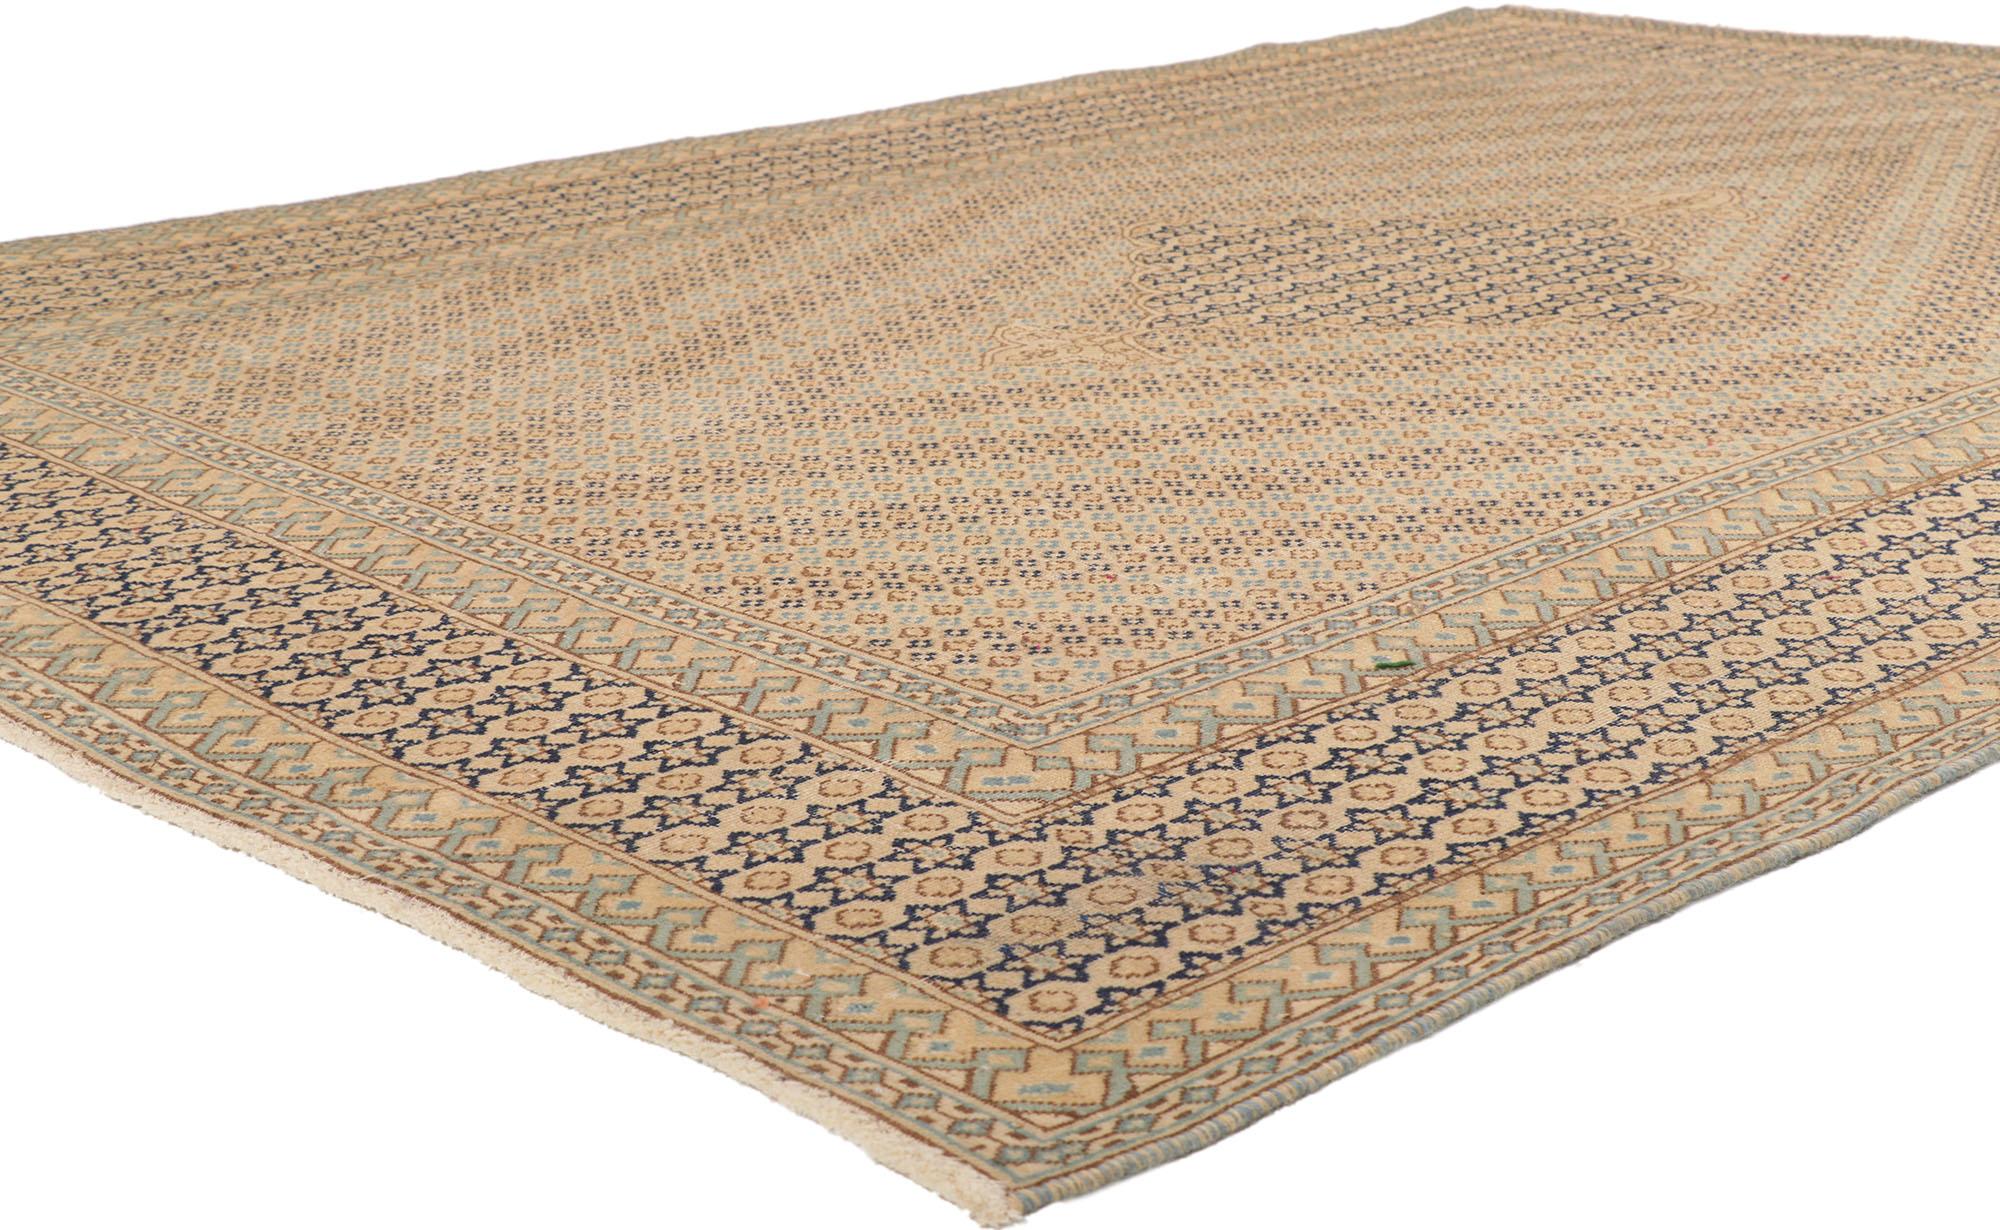 53760 Distressed Vintage Persian Kerman Rug, 06'09 x 09'06.
Relaxed refinement meets soothing sophistication in this hand knotted wool distressed vintage Persian Kerman rug. Let yourself be whisked away on a journey of serenity, as you step onto